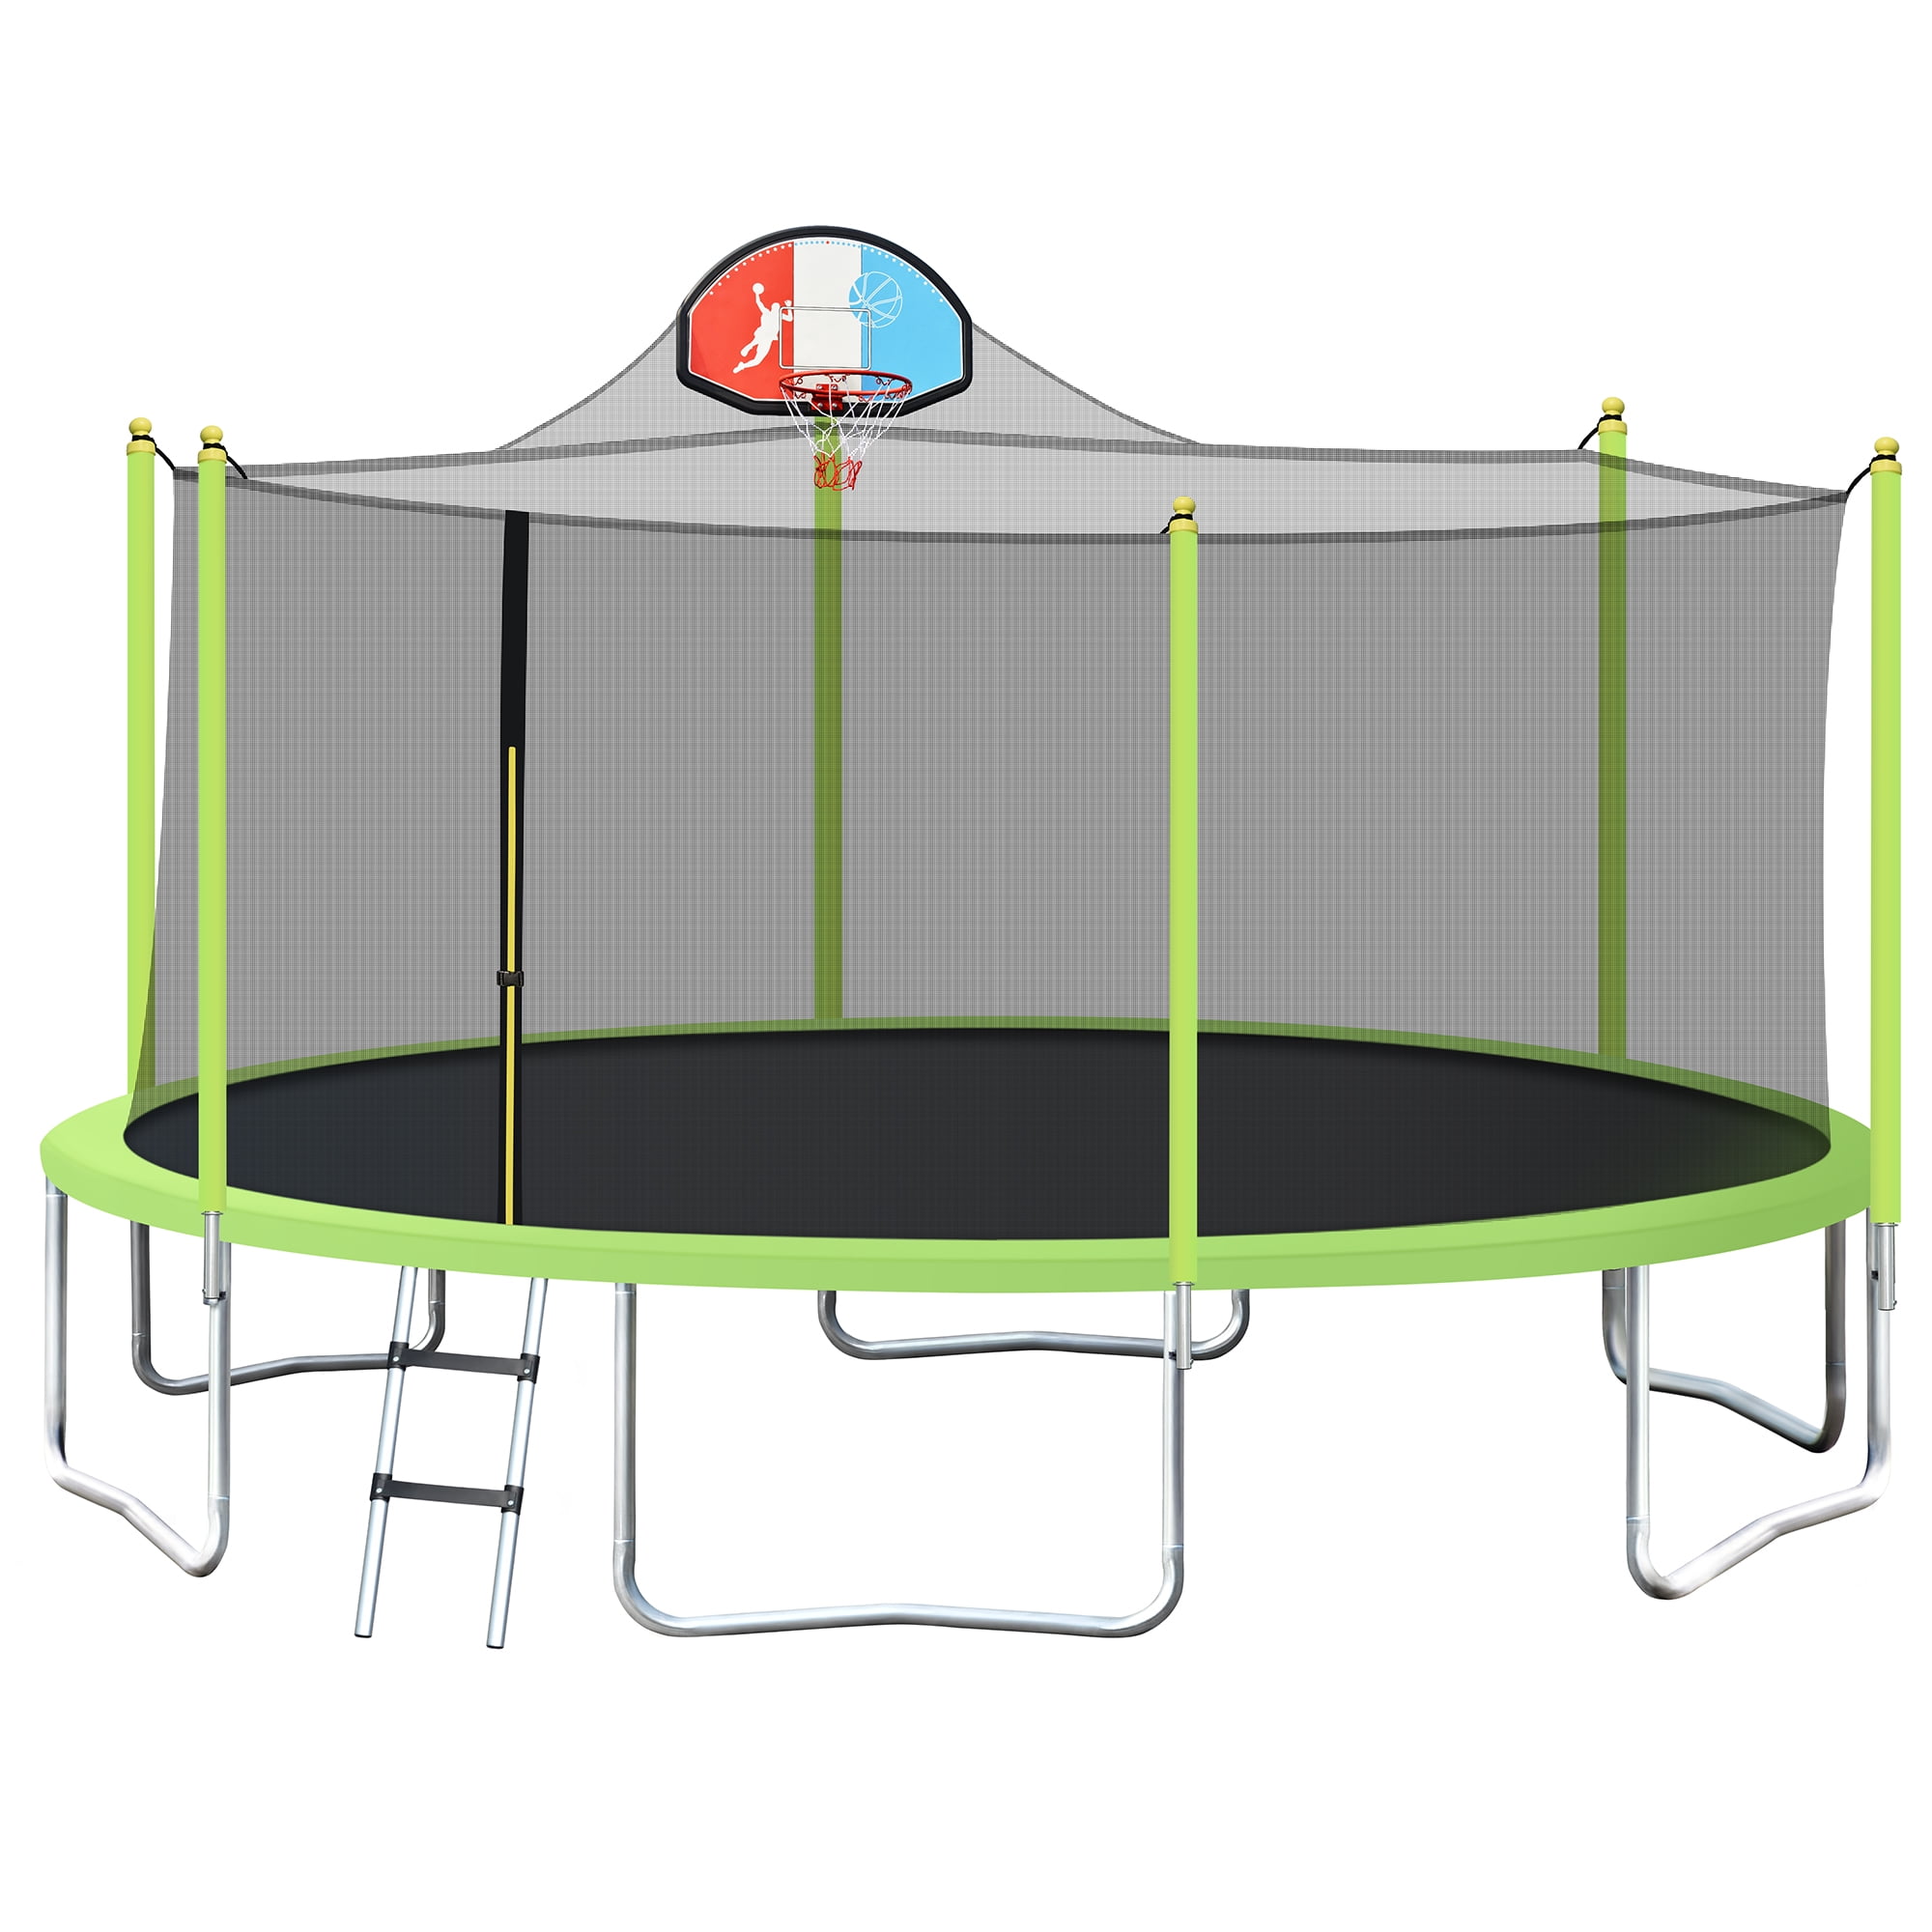 GoolRC 16FT Trampoline for Kids with Safety Enclosure Net, Basketball Hoop and Ladder, Easy Assembly Round Outdoor Recreational Trampoline